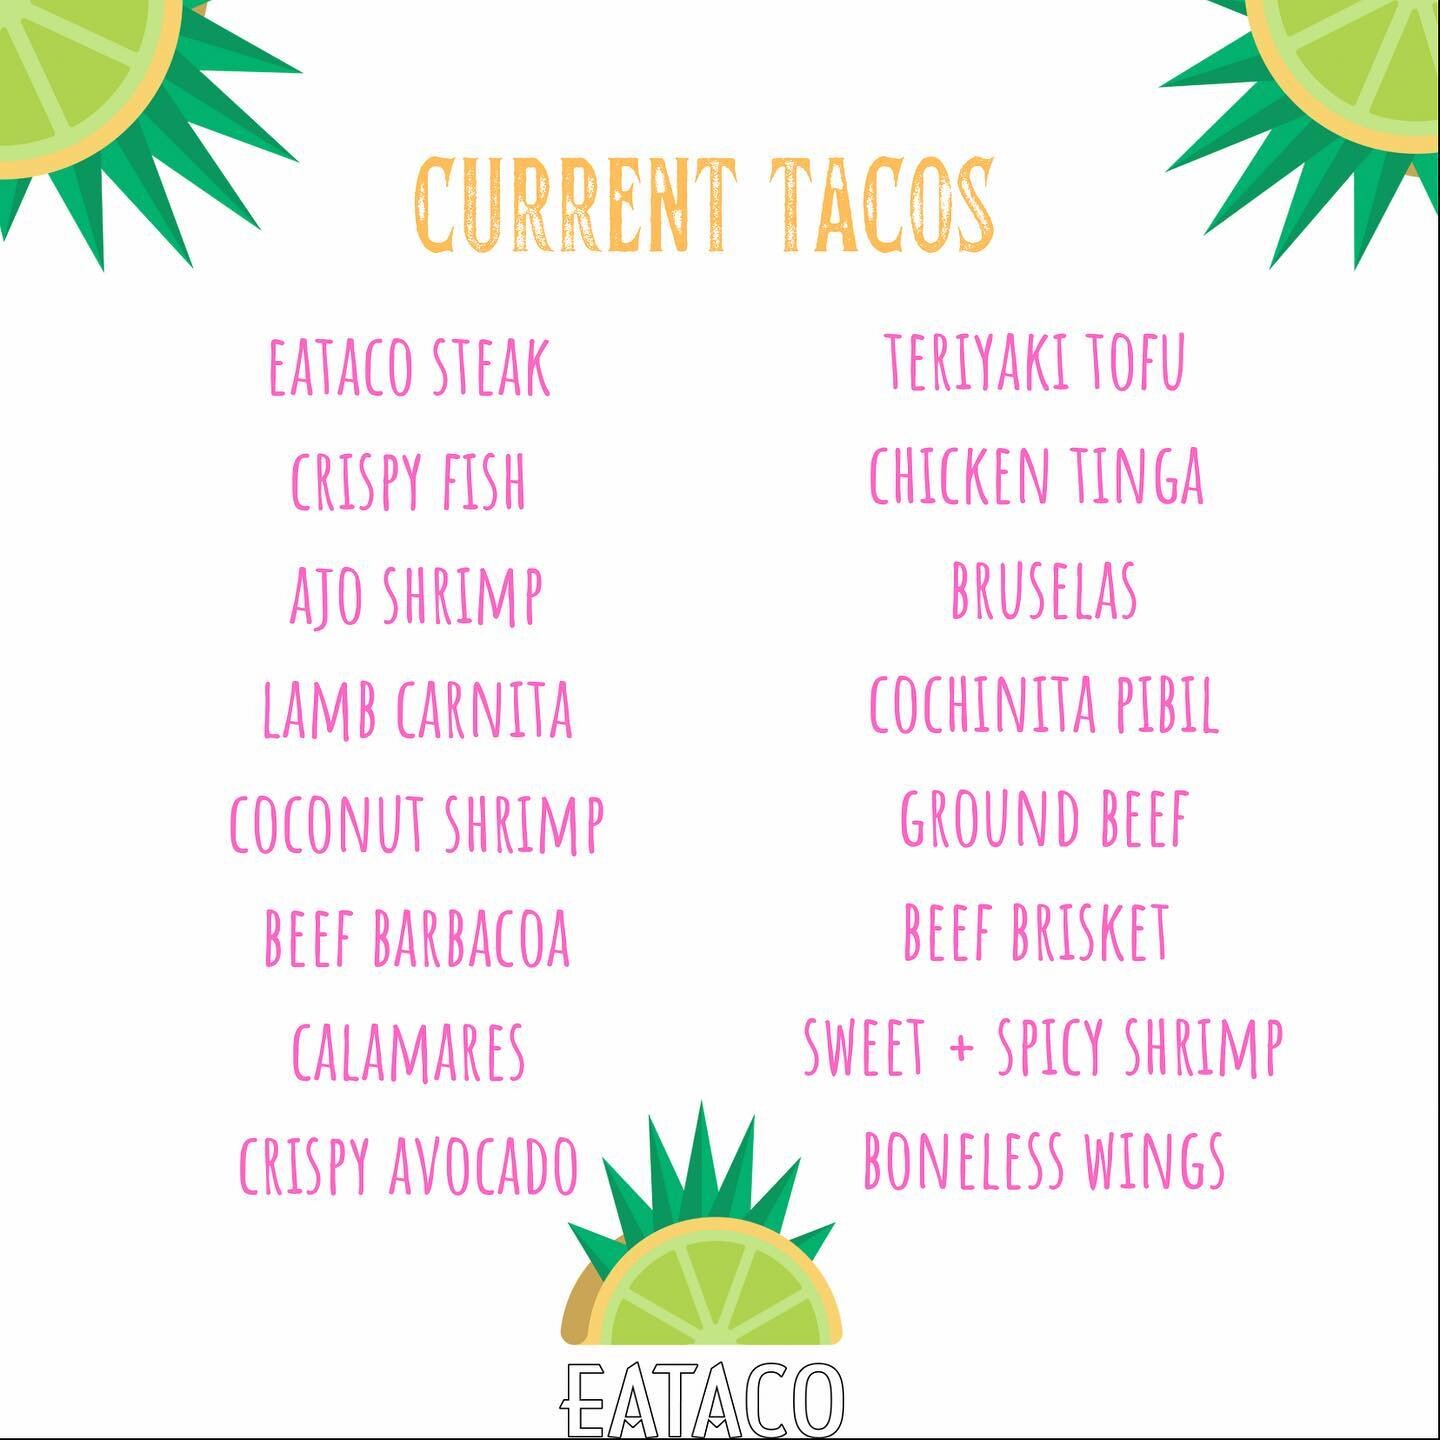 most asked question: how do we choose? 
#taco #cochinitapibil #chickentinga #fish #tofu #coconut too many to list.